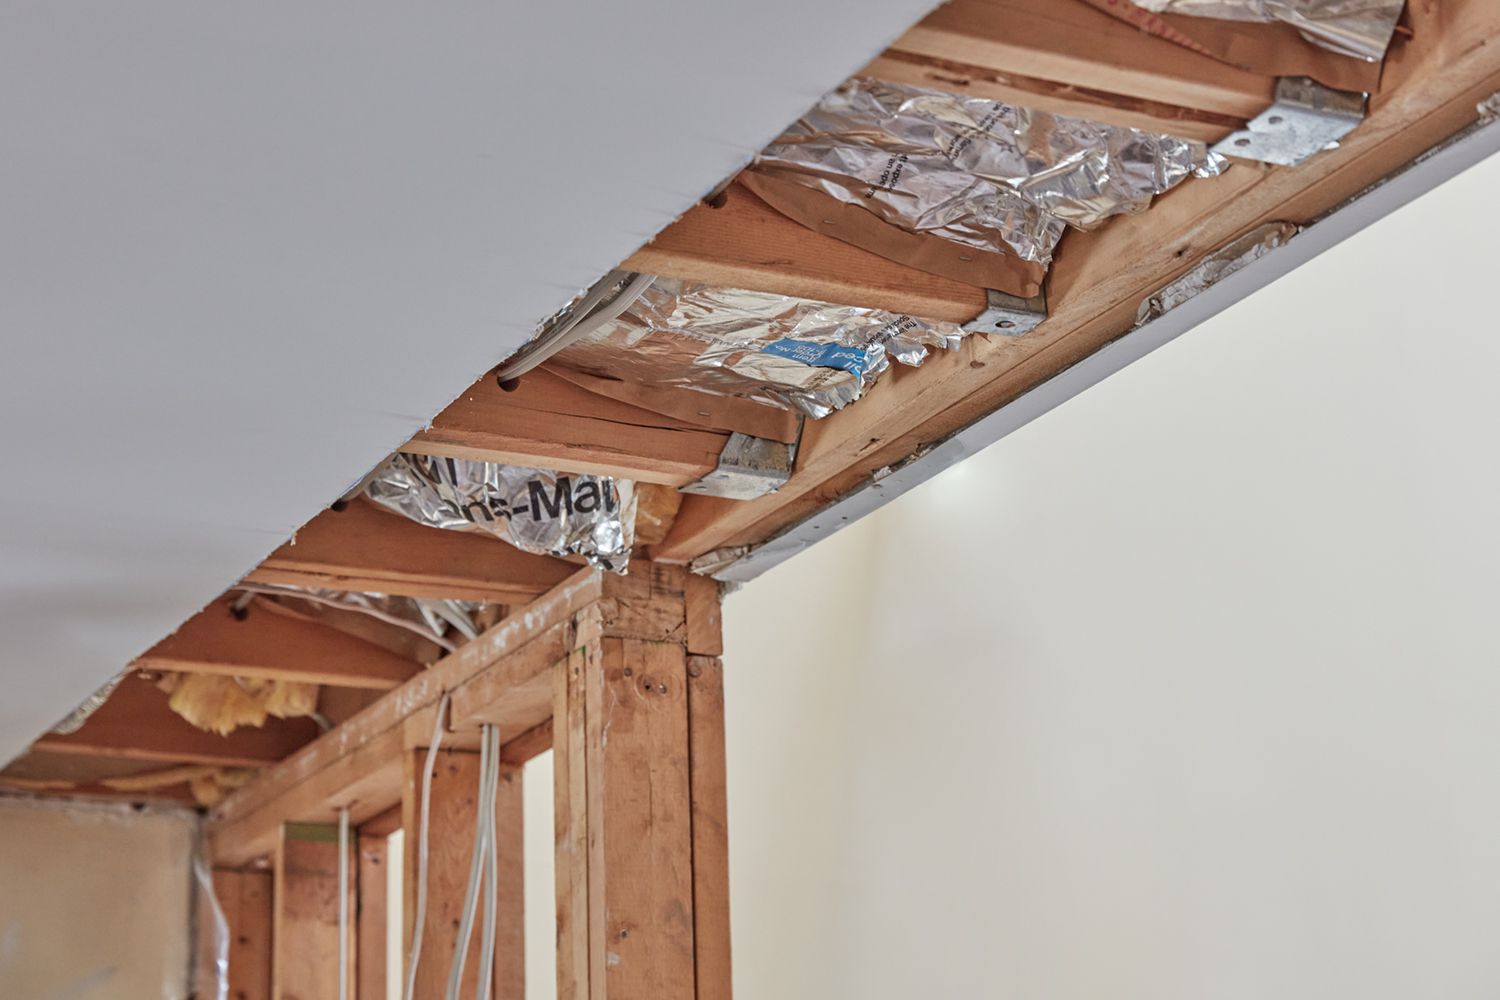 How to tell if a wall is load bearing?